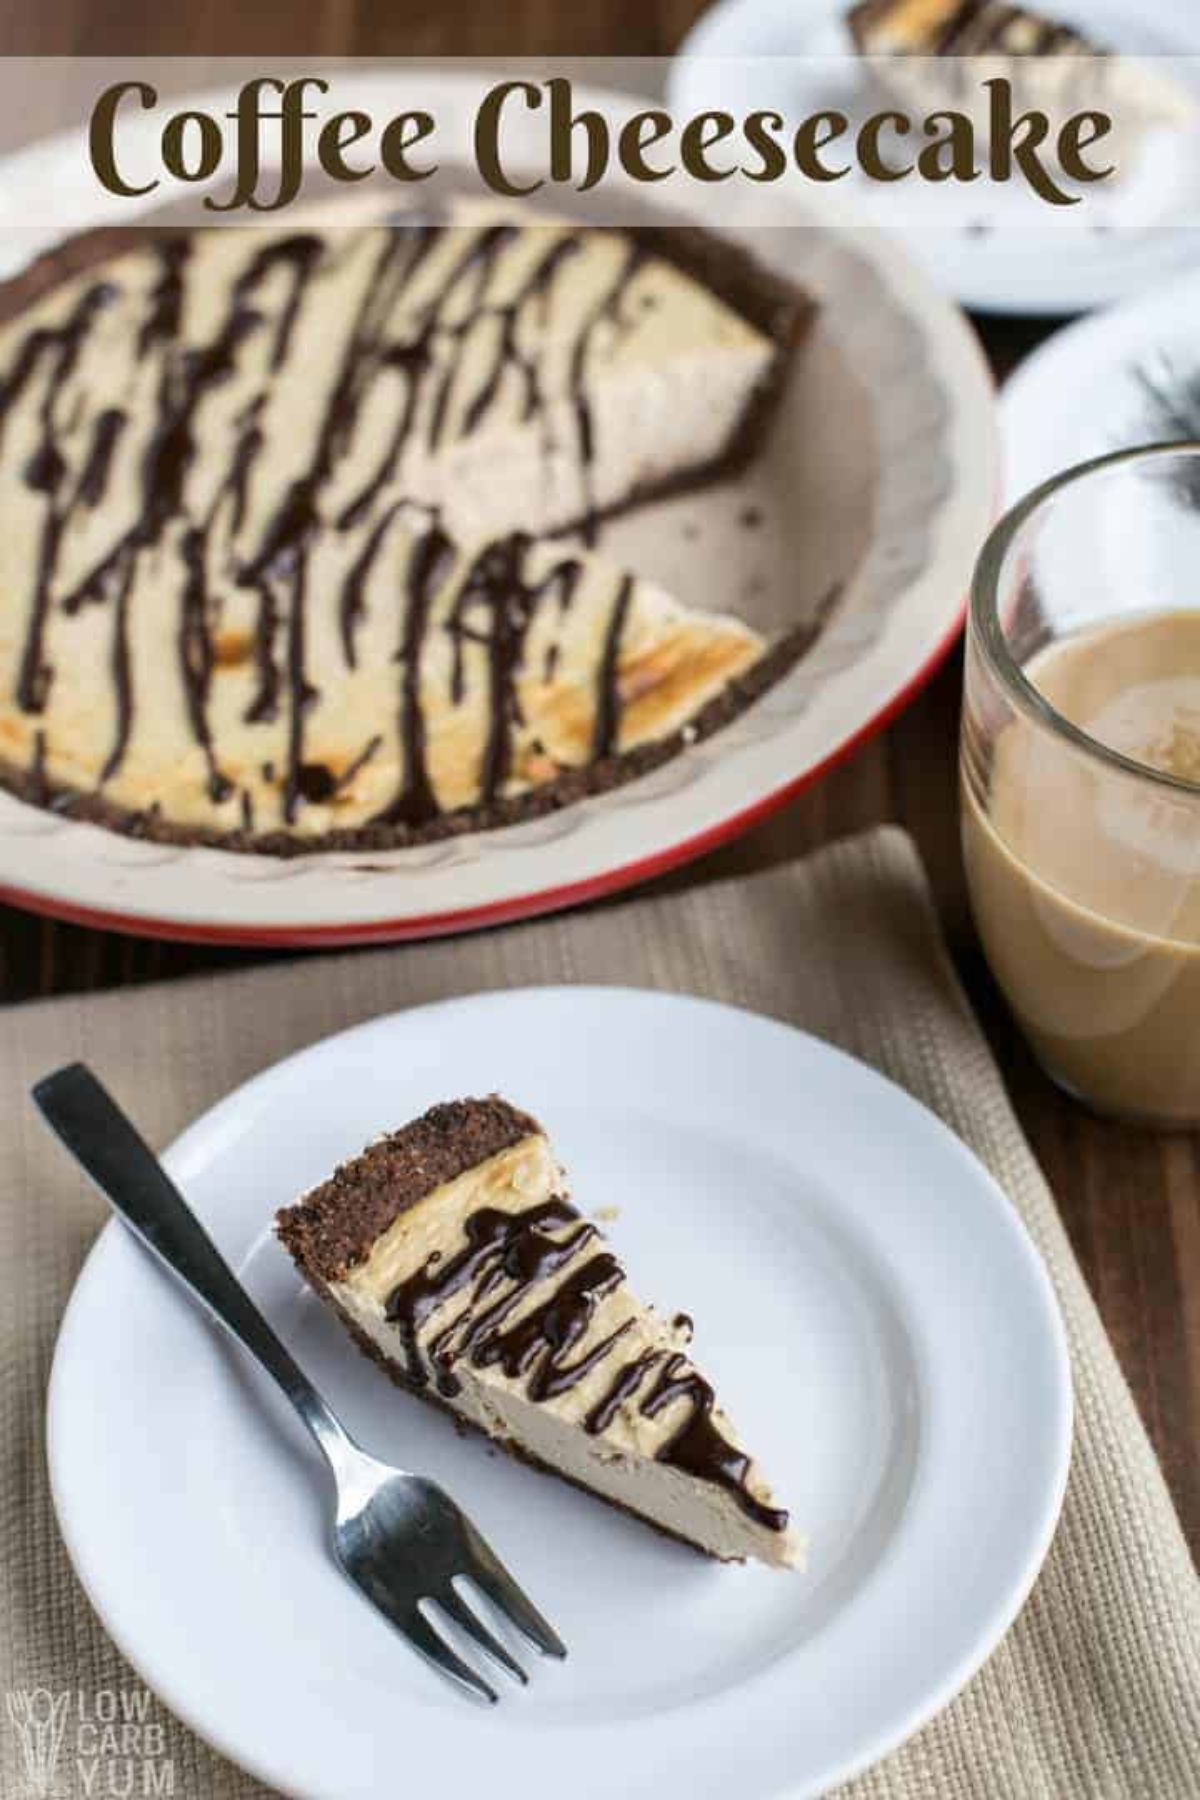 In front of a pie dish containing a vanilla cheesecake with chocolate drizle is a slice of the cheesecake on a plate with a fork